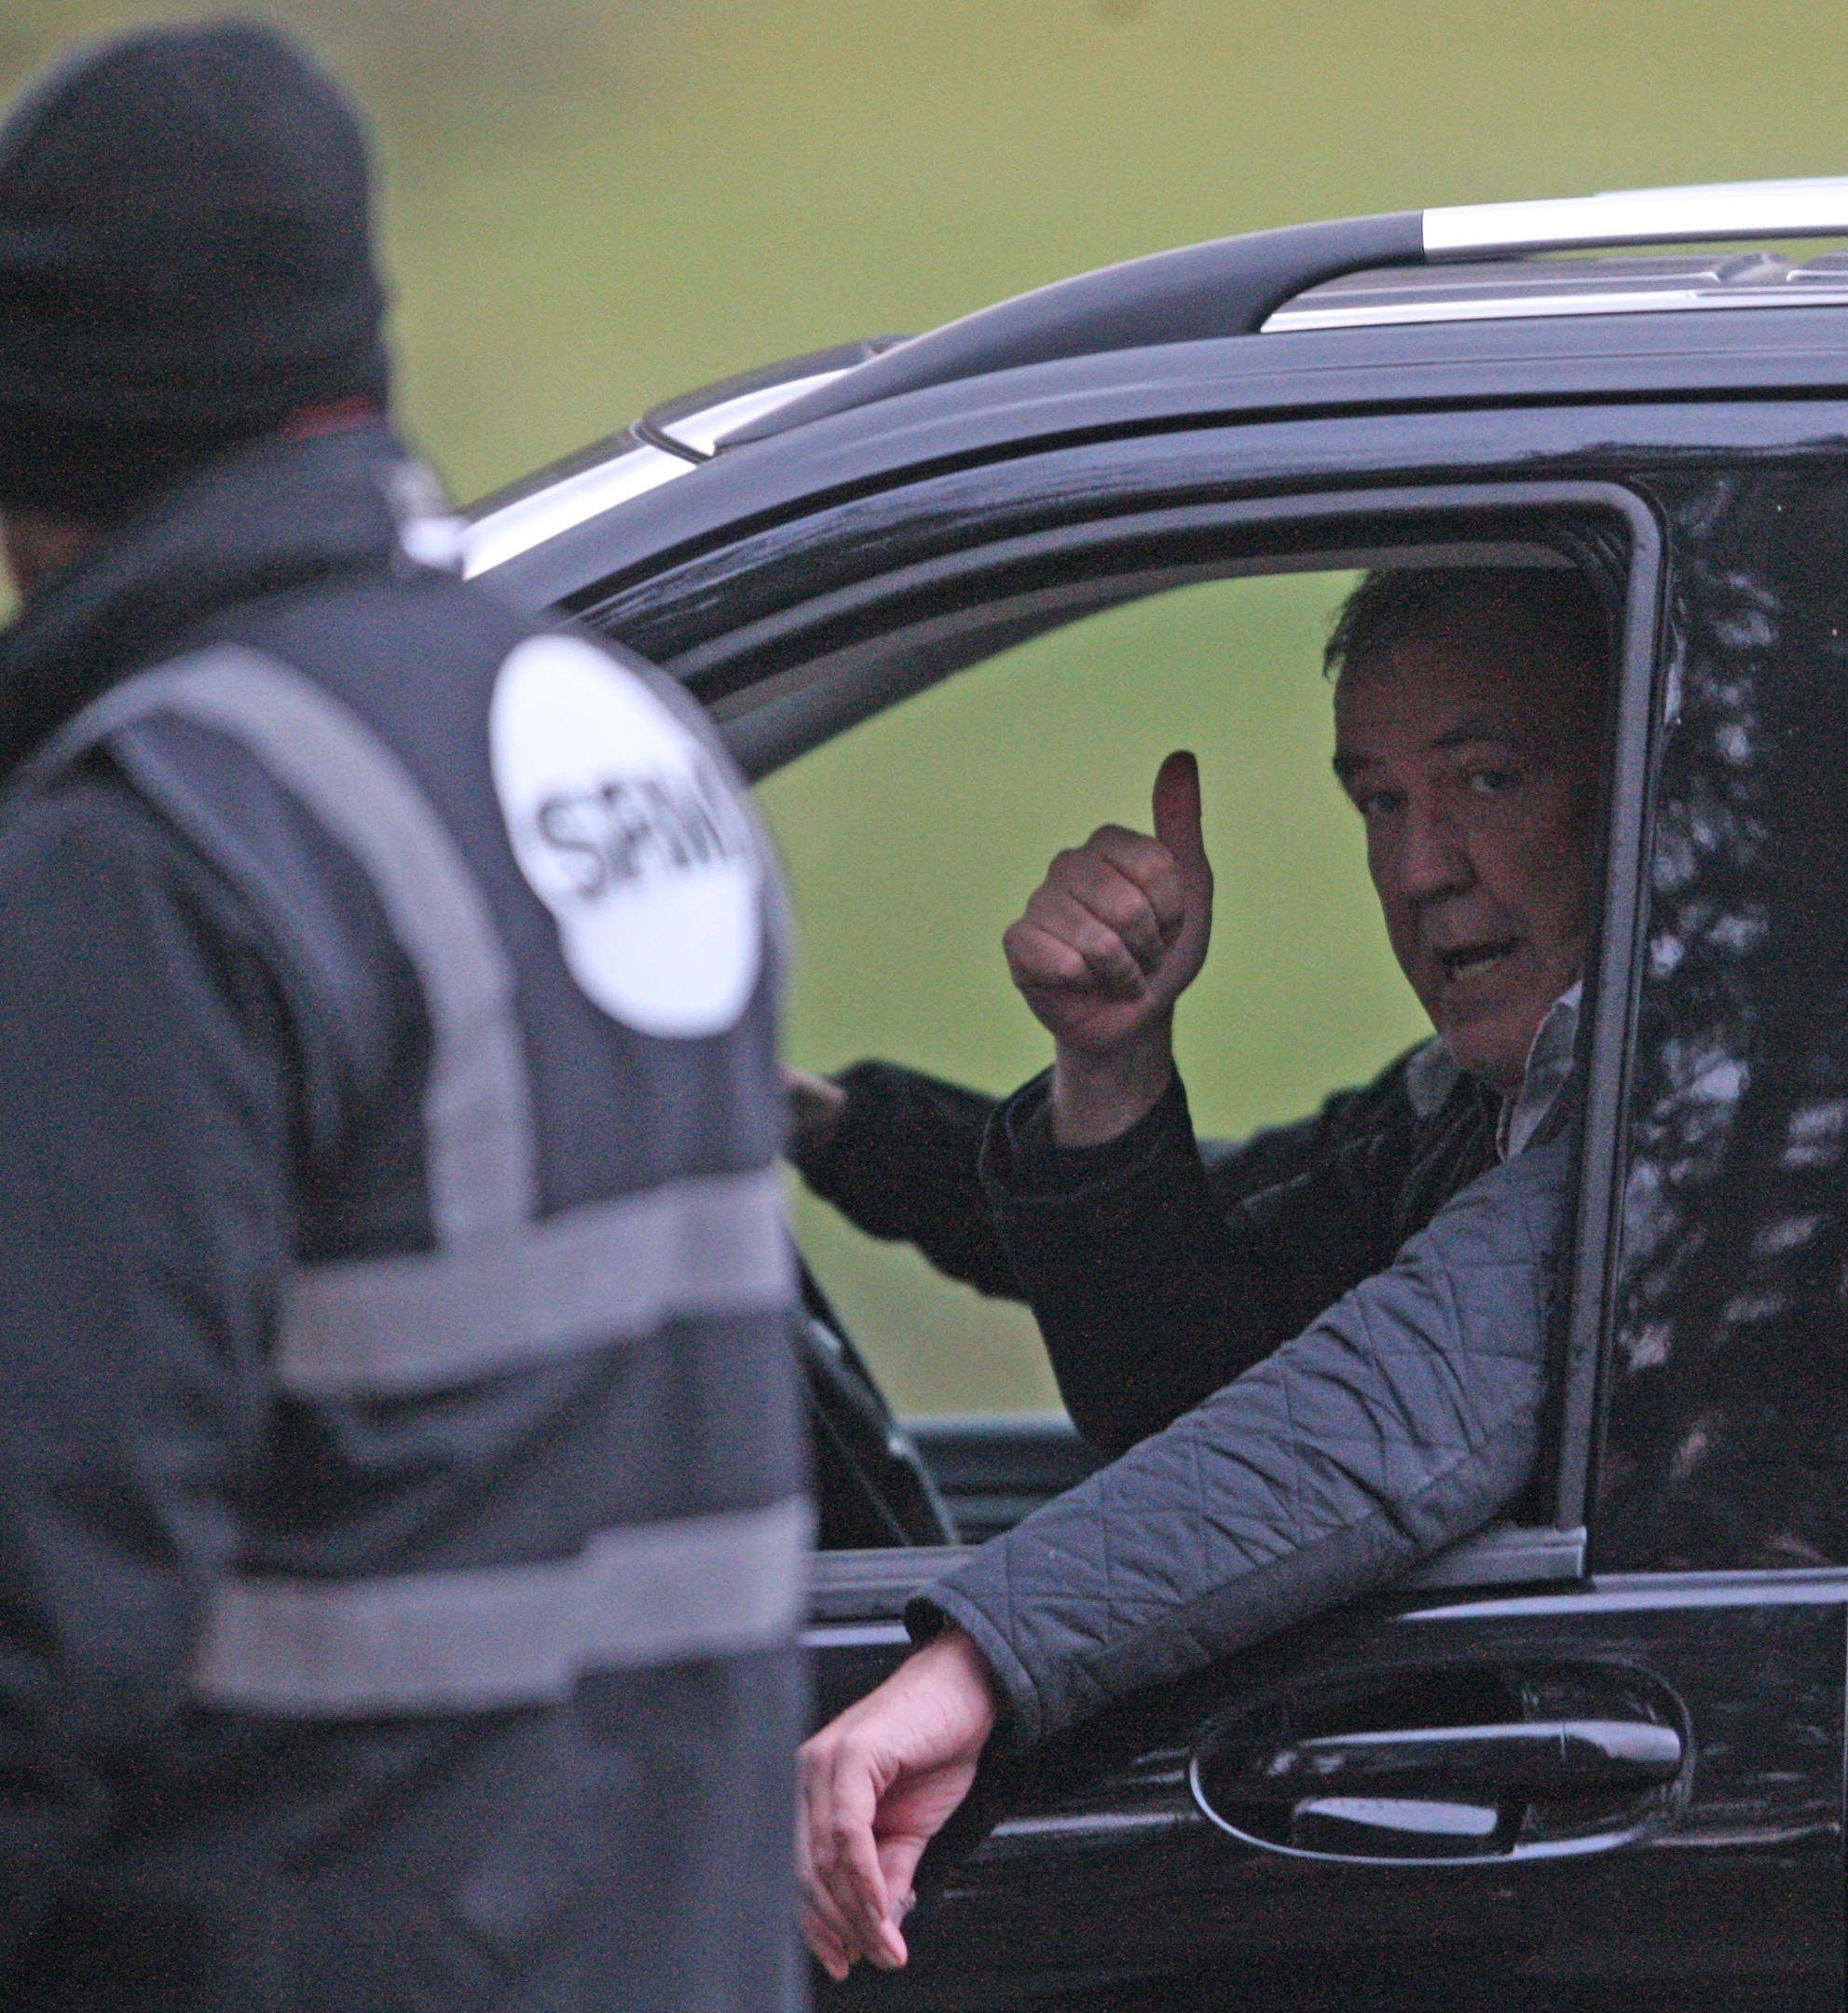 Jeremy Clarkson being driven off the set of Grand Tour which is being filmed on Loch Ness